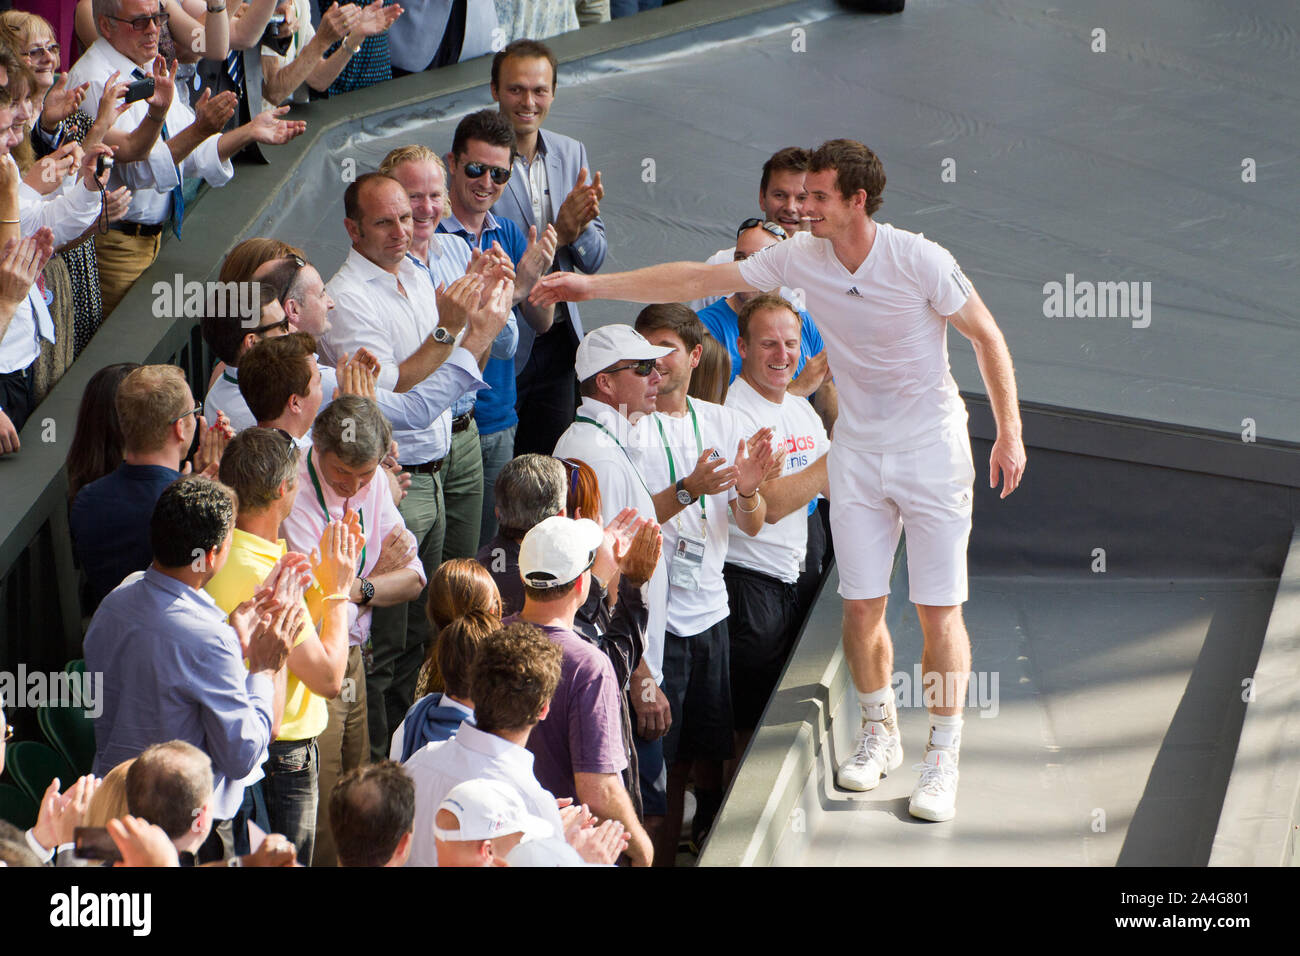 Andy Murray celebrates with his team after winning Wimbledon 2013. 77 years of tennis hurt comes to an end. Stock Photo